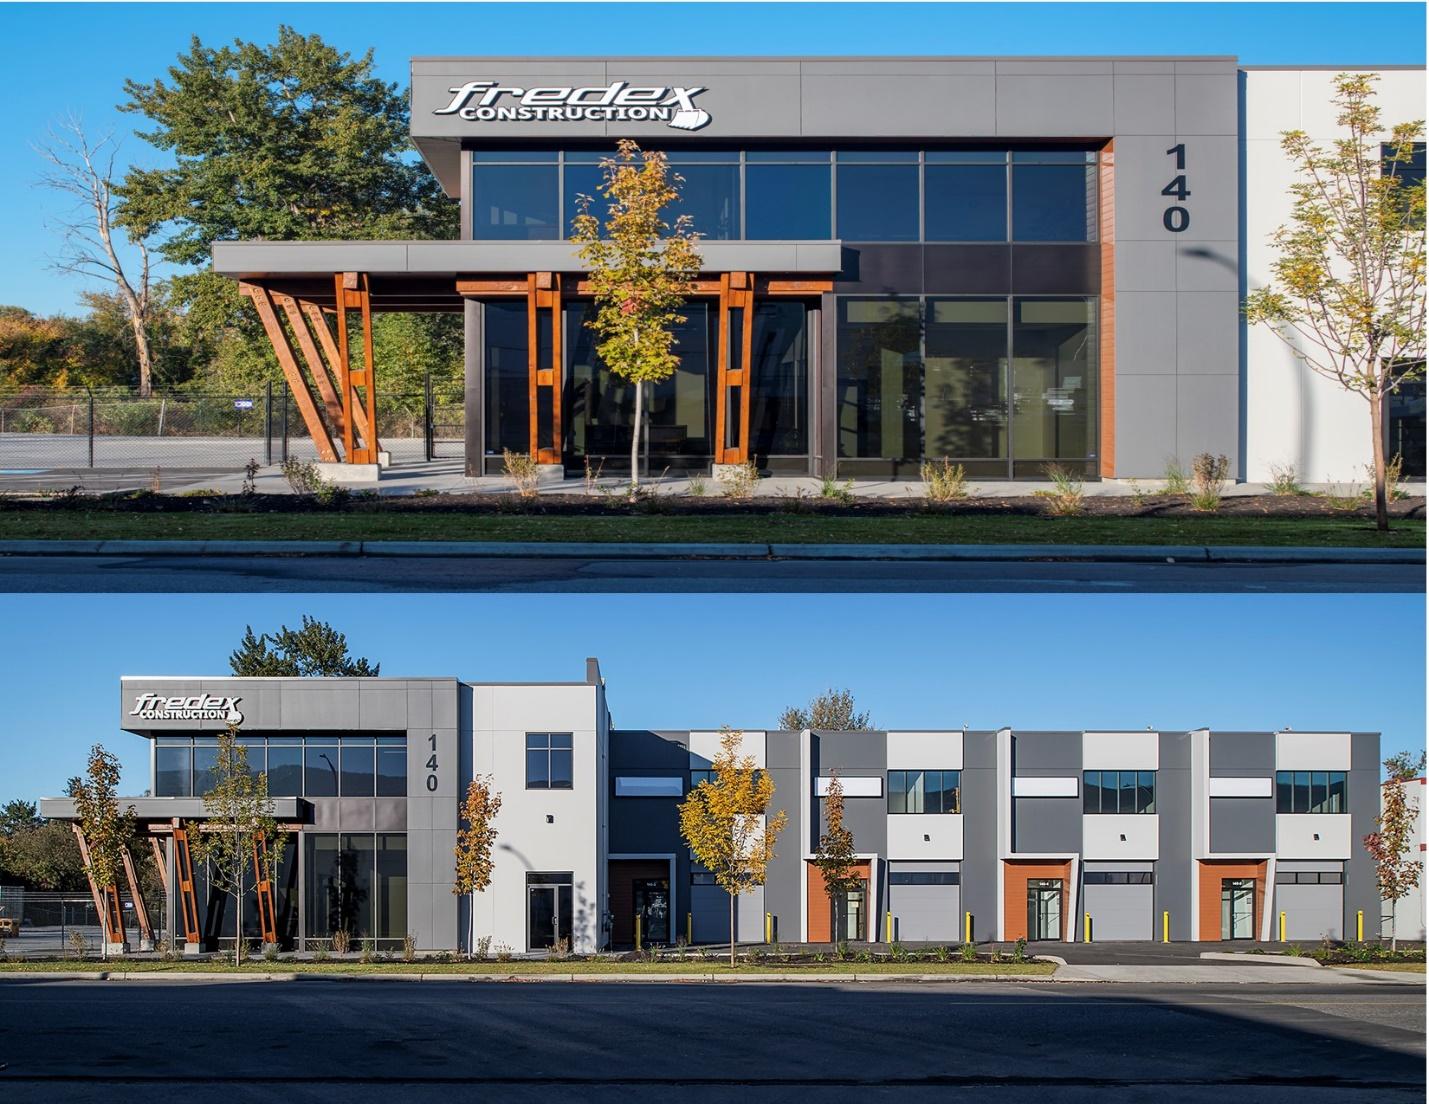 Adams road industrial building, a design-build project by Chriscan Construction.